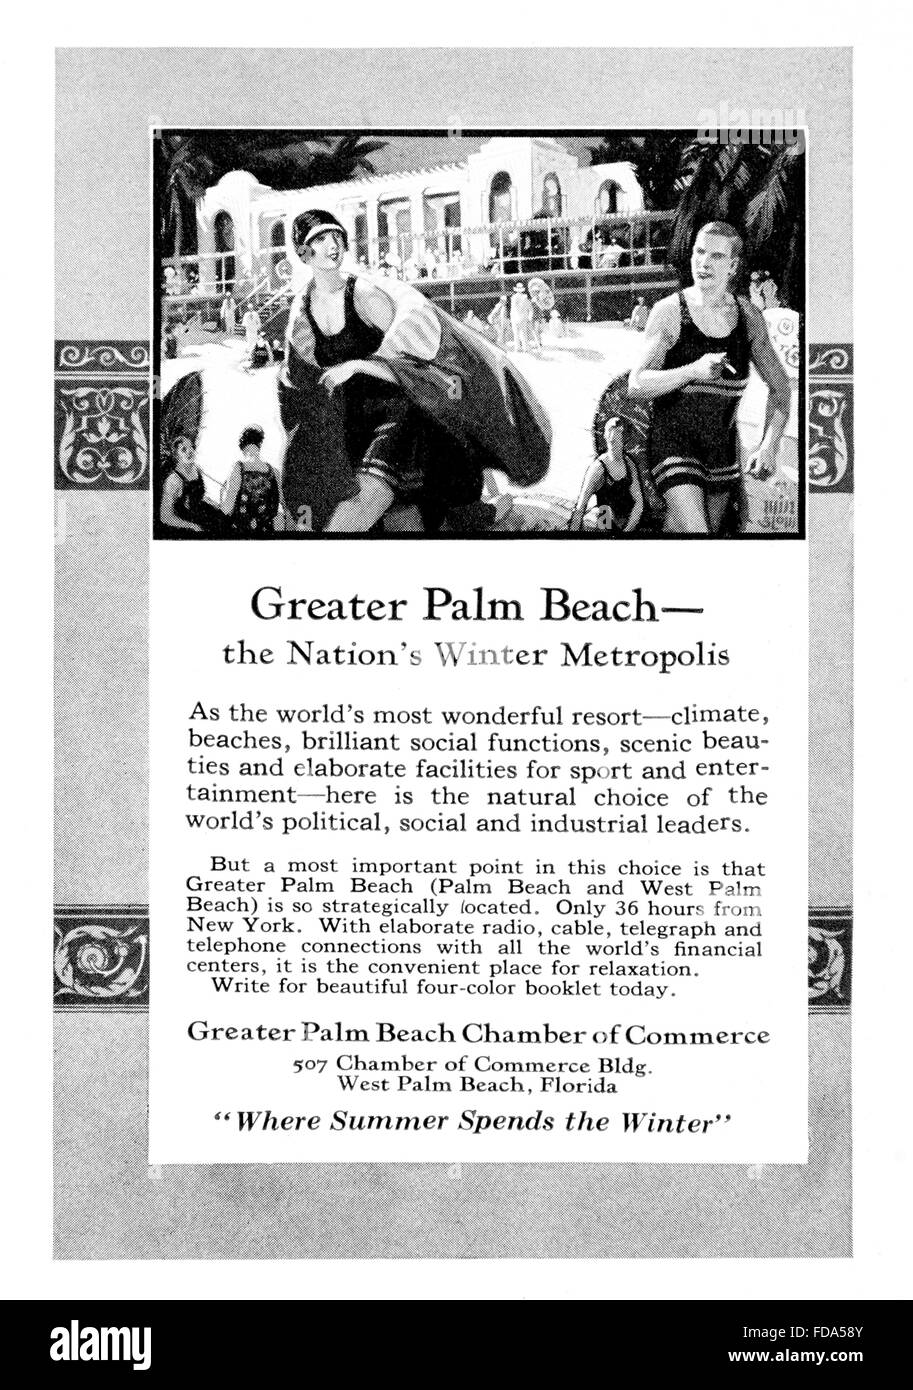 Holidays in Florida, Greater Palm Beach, the Nation's Winter Metropolis, travel Advertisement from 1926 Stock Photo